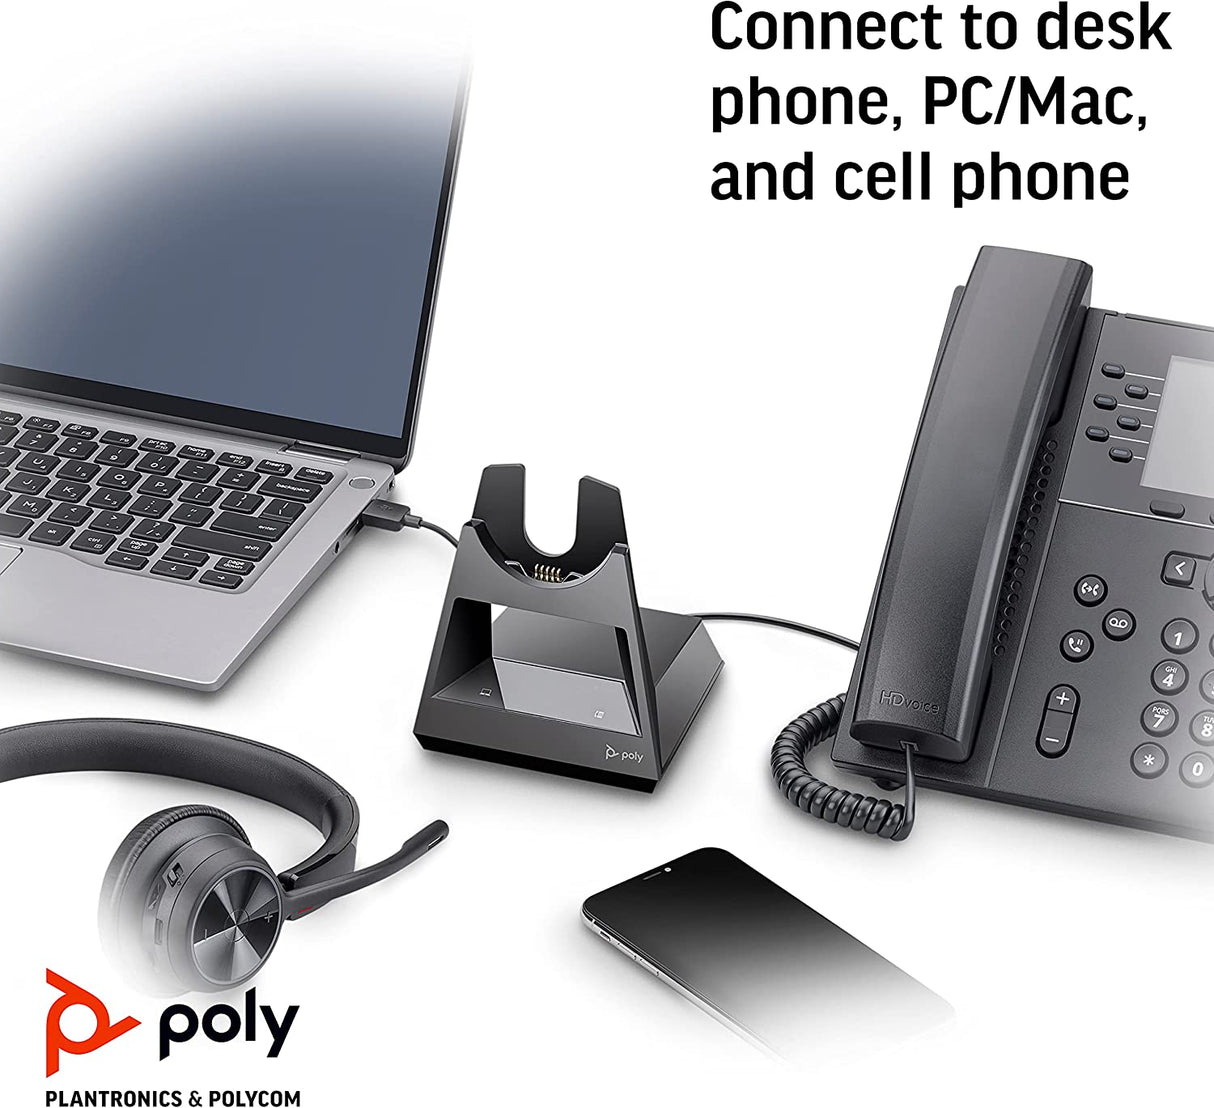 Poly - Voyager Office Base (Plantronics) - Compatible with Voyager Focus 2 and Voyager 4300 UC Series Headsets (Sold Separately) - Connect to PC/Mac, Deskphone, &amp; Cell Phone Standard Version Office Base (Headset Not Included)